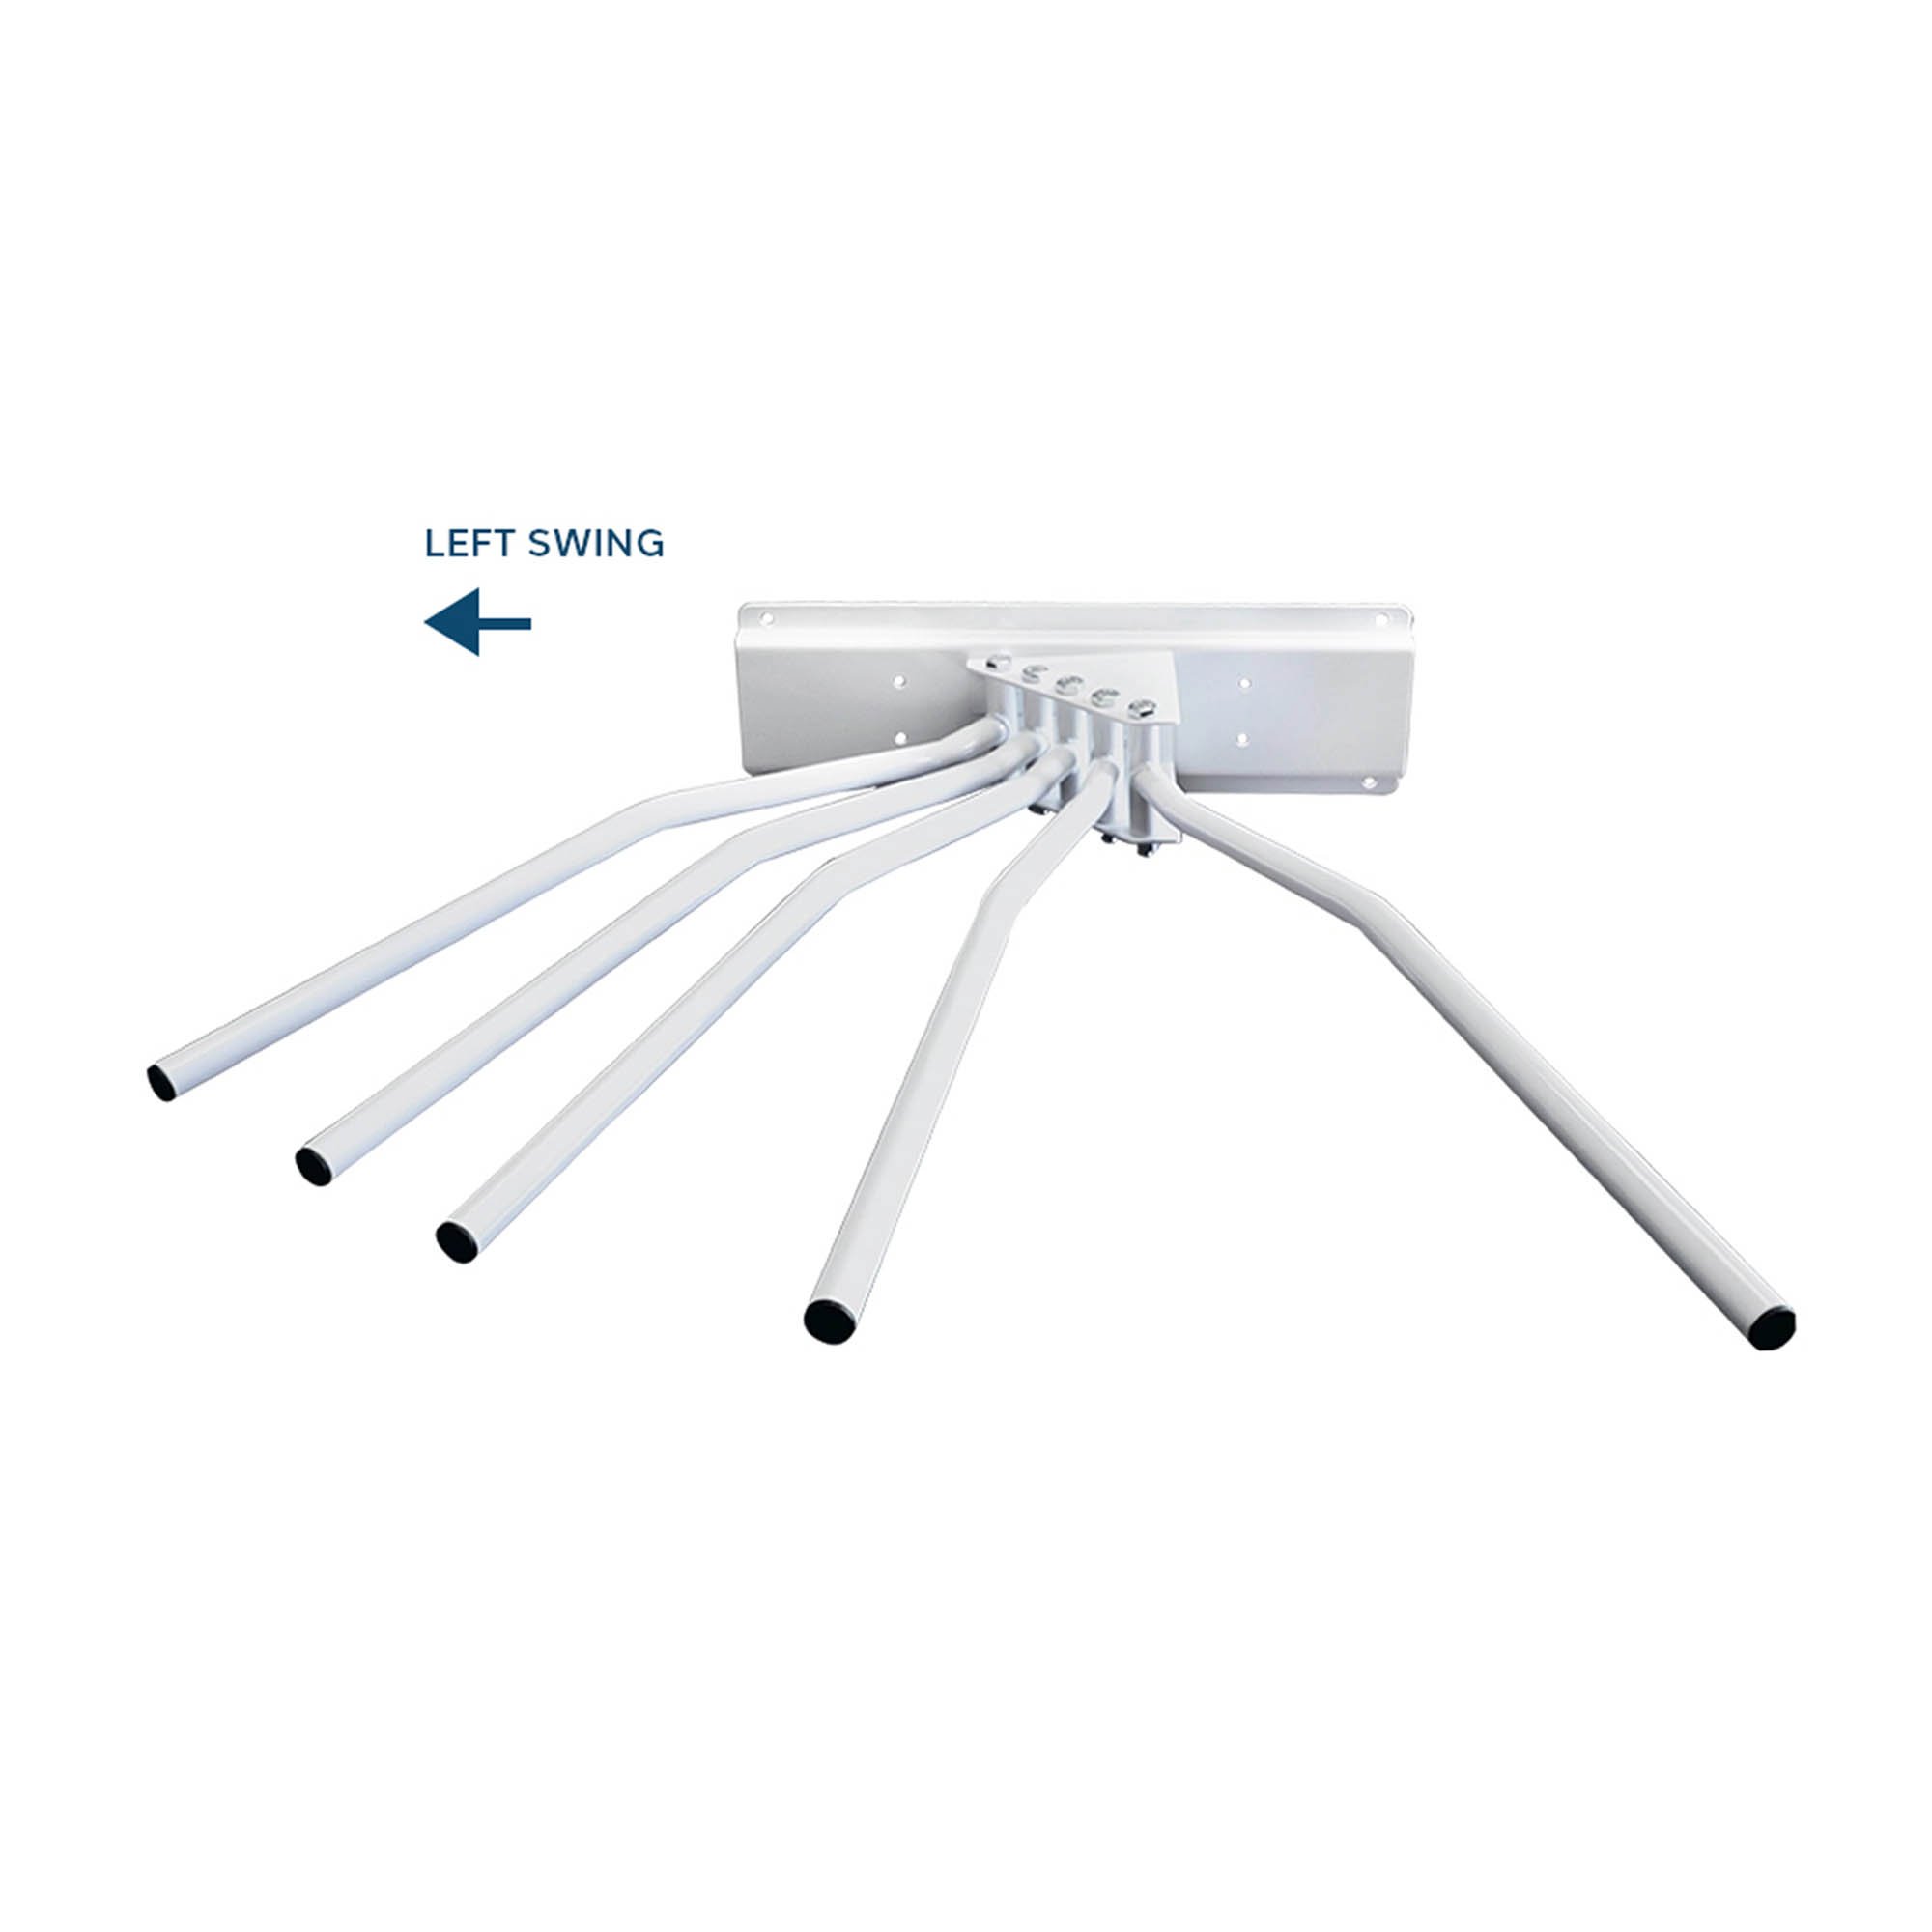 Wall Mounted Apron Rack with 5 Swing Rods - Left Swing